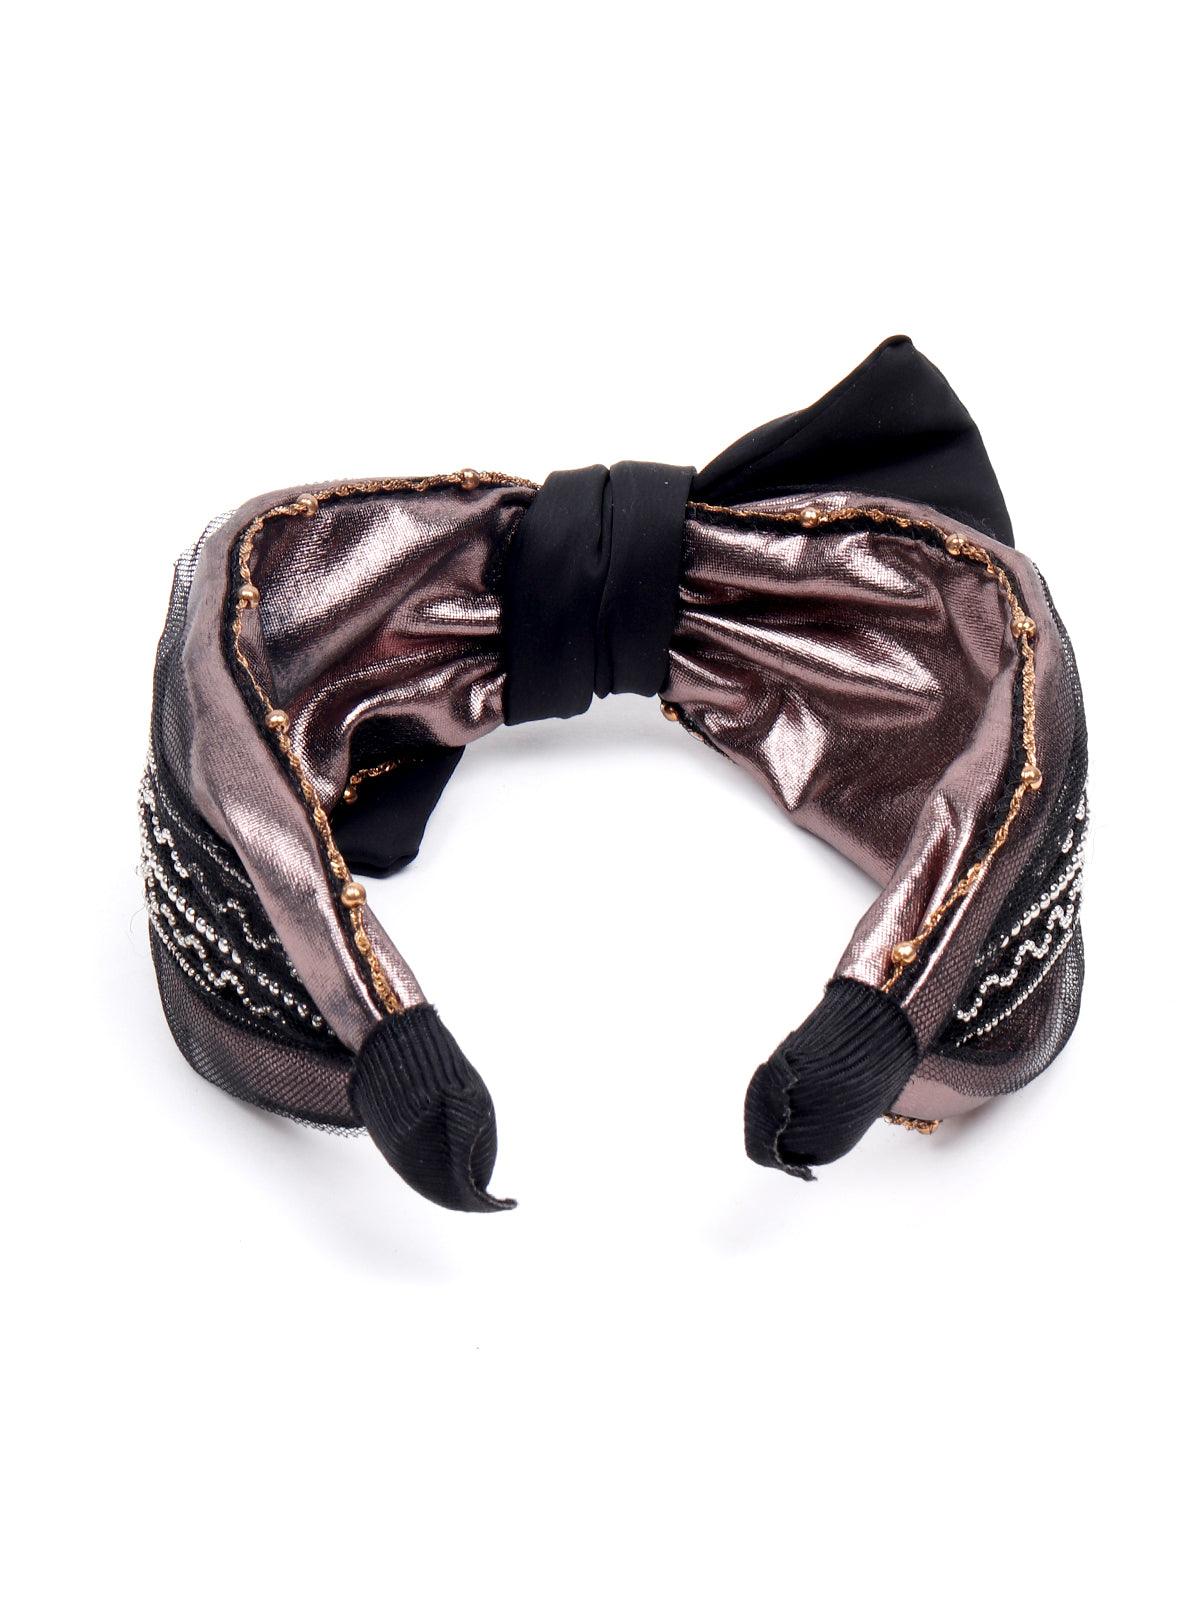 Gorgeous metallic hairband with a bow - Odette